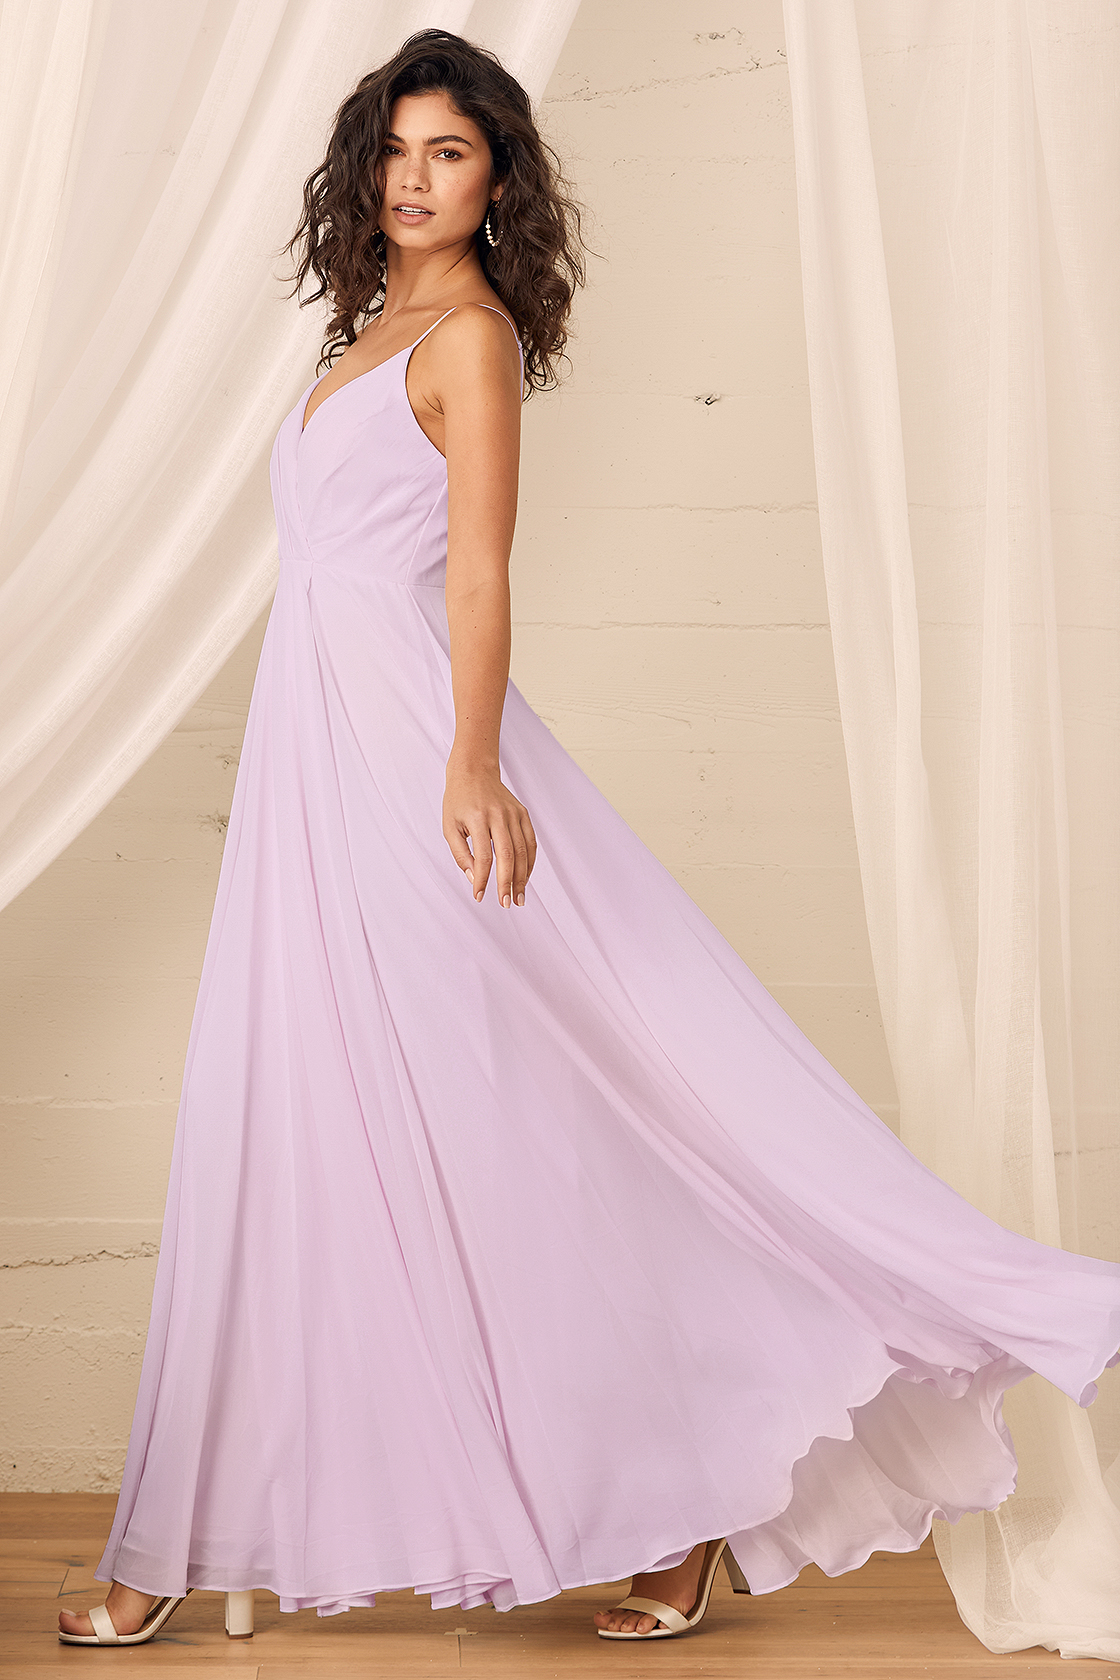 Unique Prom Dresses For A Showstopping Look.com Fashion Blog